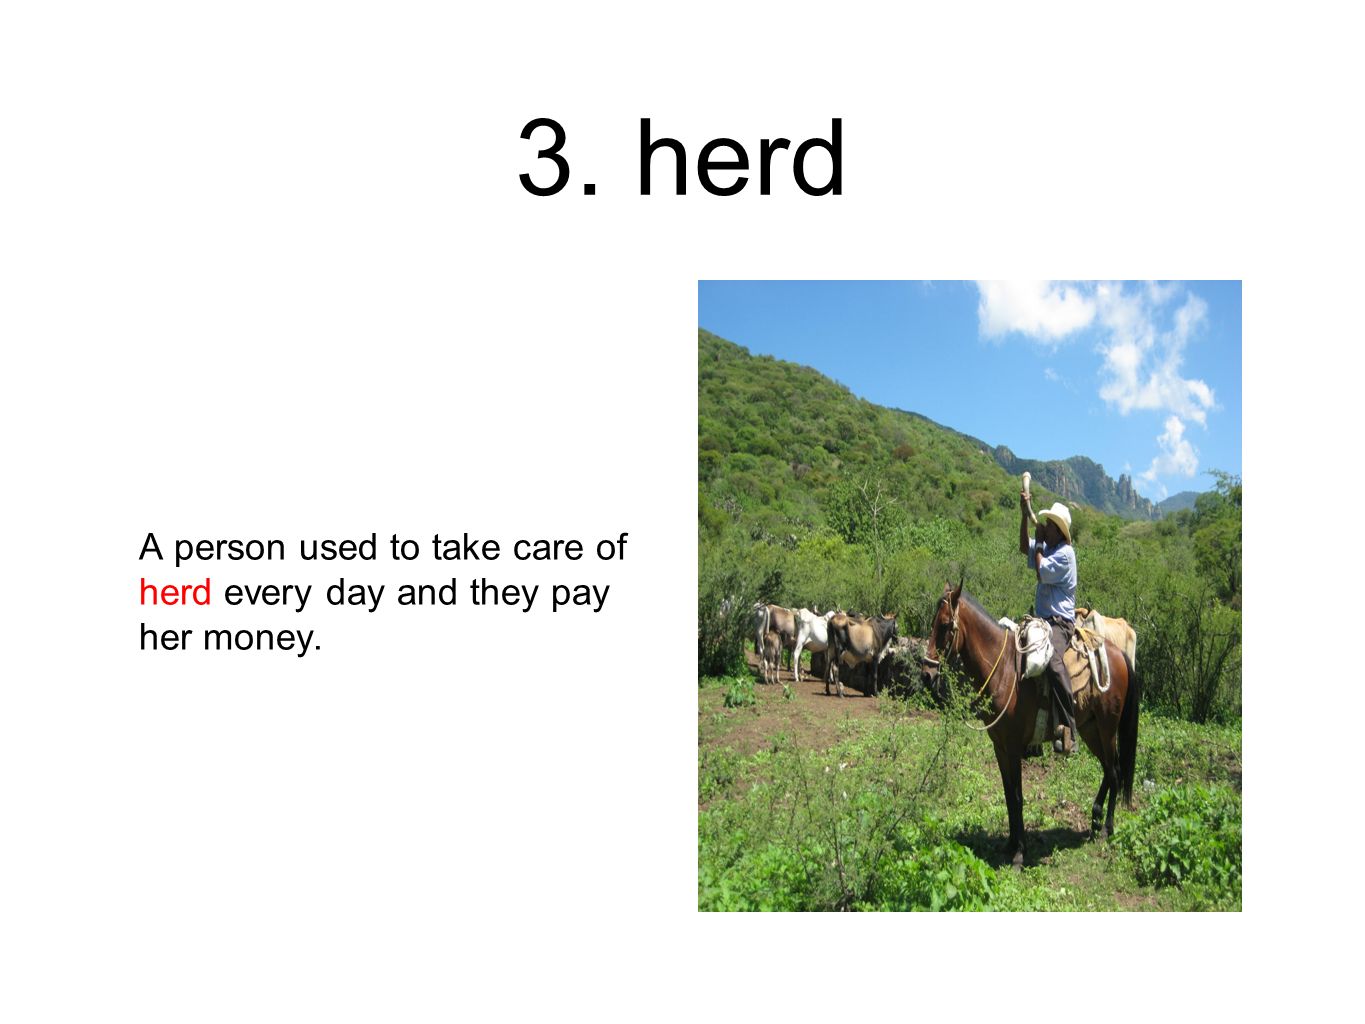 3. herd A person used to take care of herd every day and they pay her money.